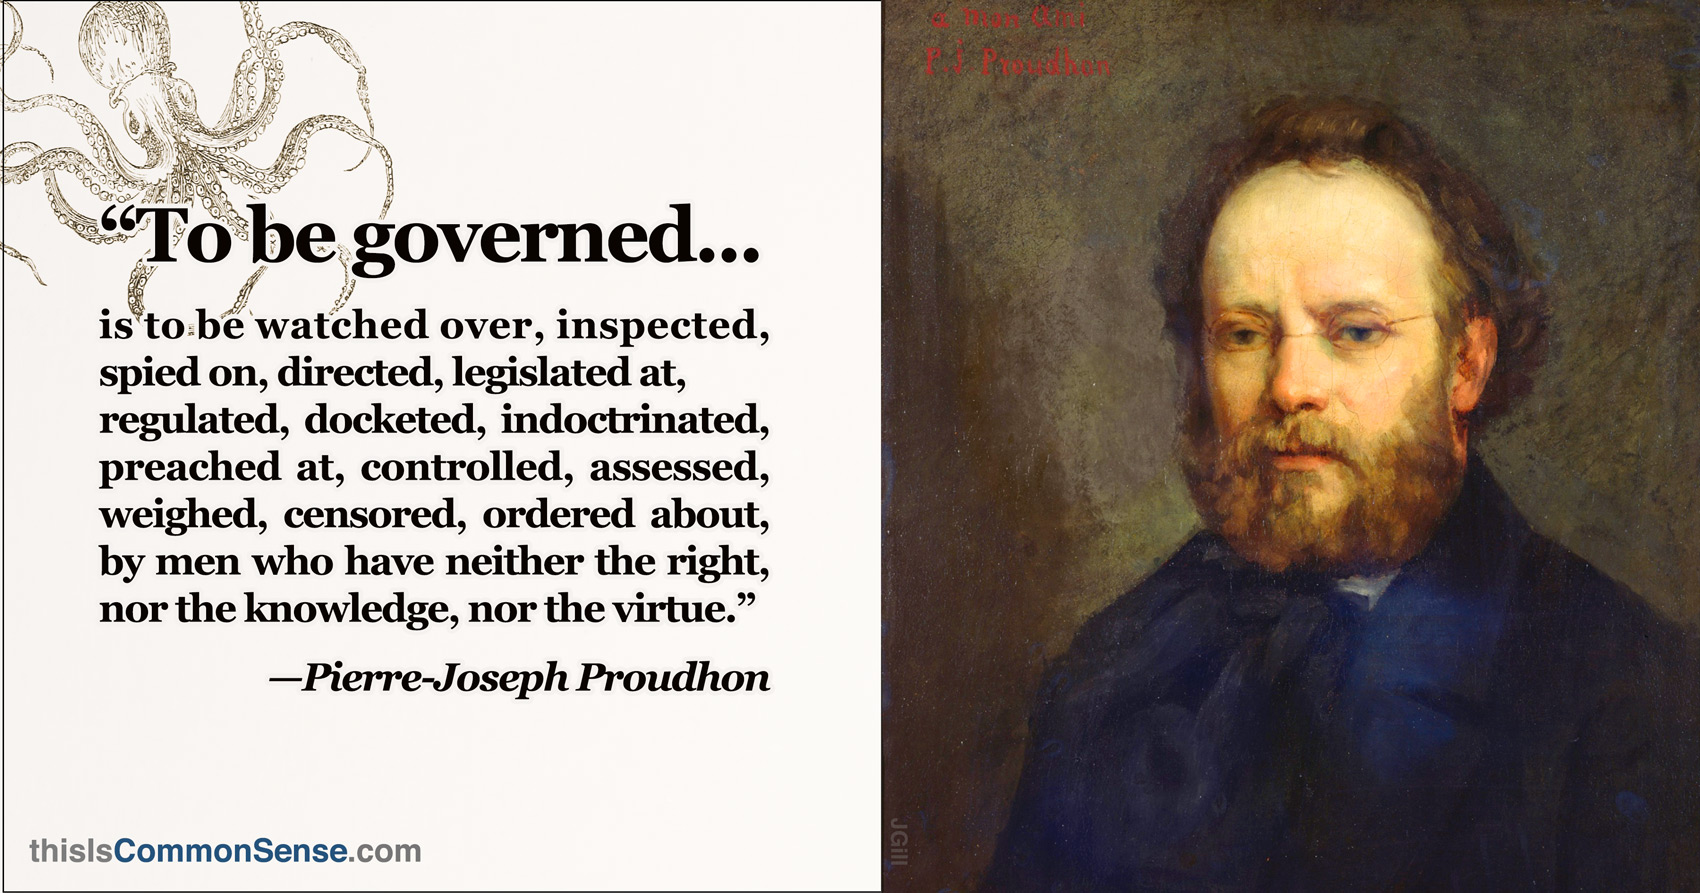 To be governed: Pierre-Joseph_Proudhon